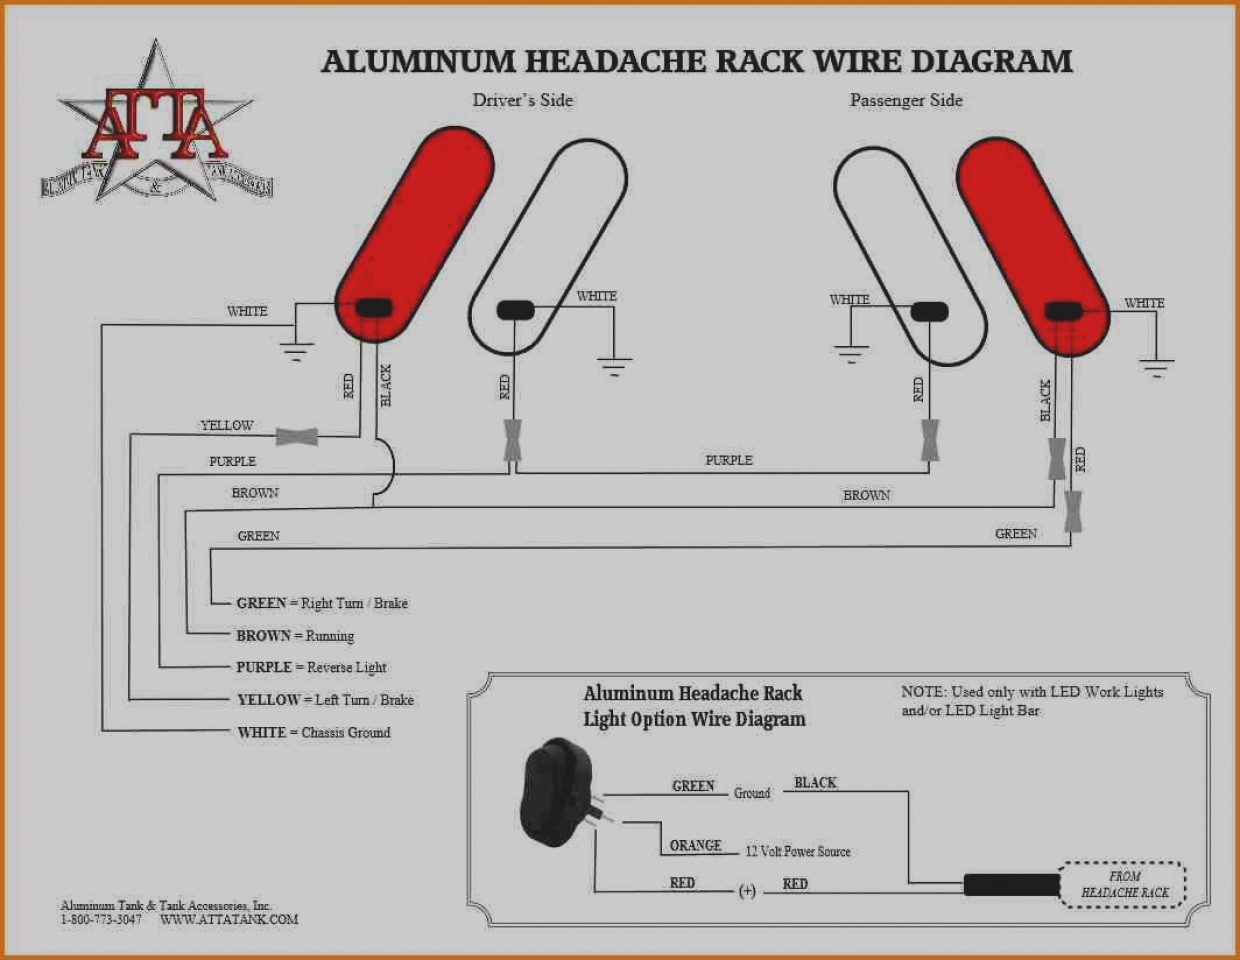 27 Elegant Wiring Diagram For Led Lights Trailer 10 3 Wire Tail Light Ignition And